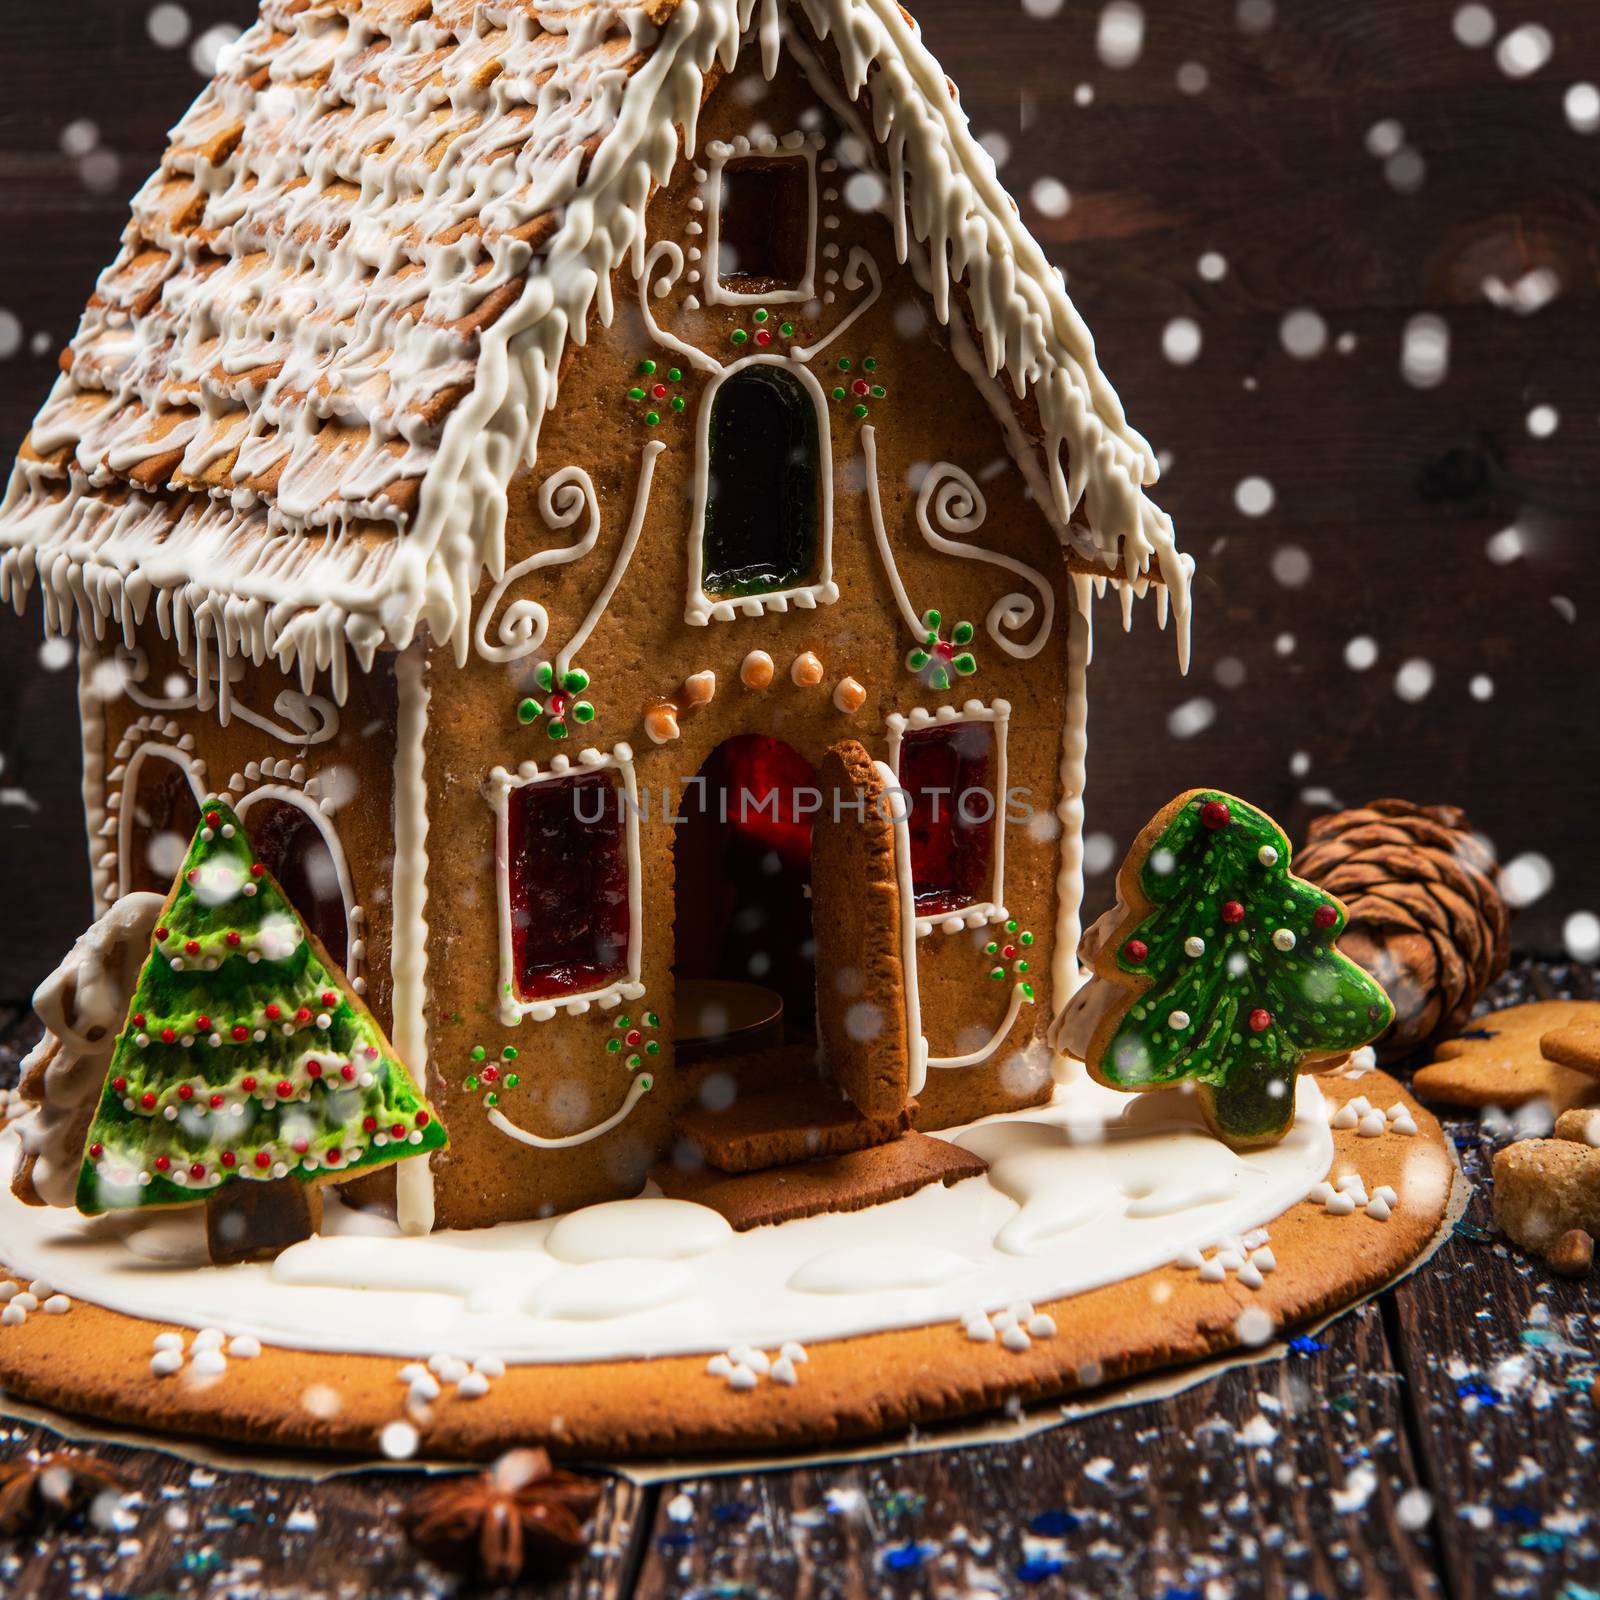 Gingerbread house with lights by rusak